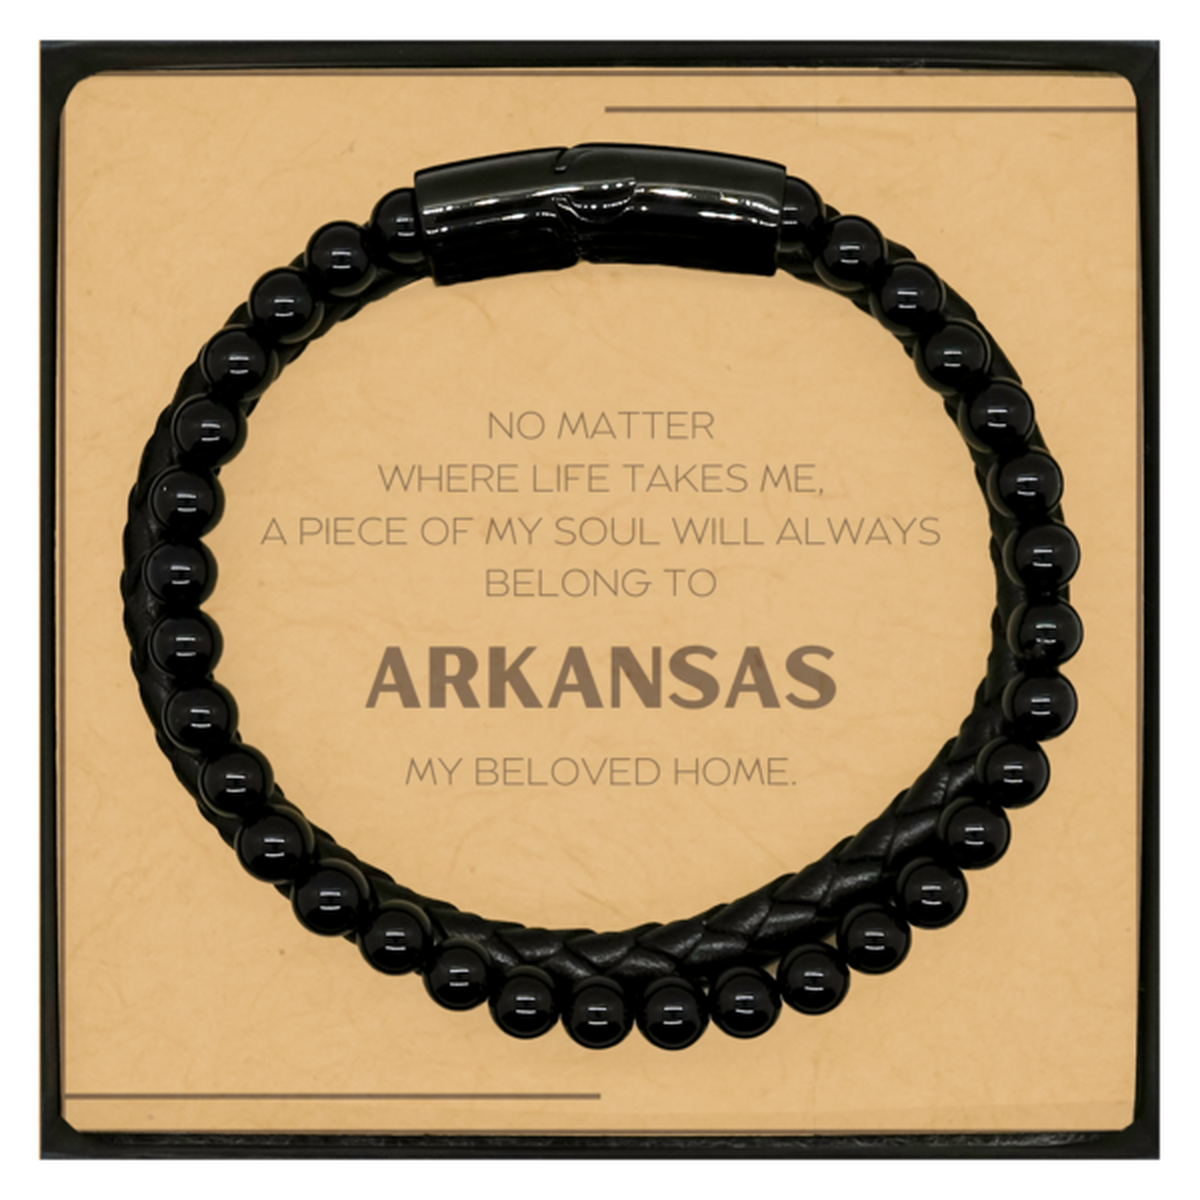 Love Arkansas State Gifts, My soul will always belong to Arkansas, Proud Stone Leather Bracelets, Birthday Christmas Unique Gifts For Arkansas Men, Women, Friends